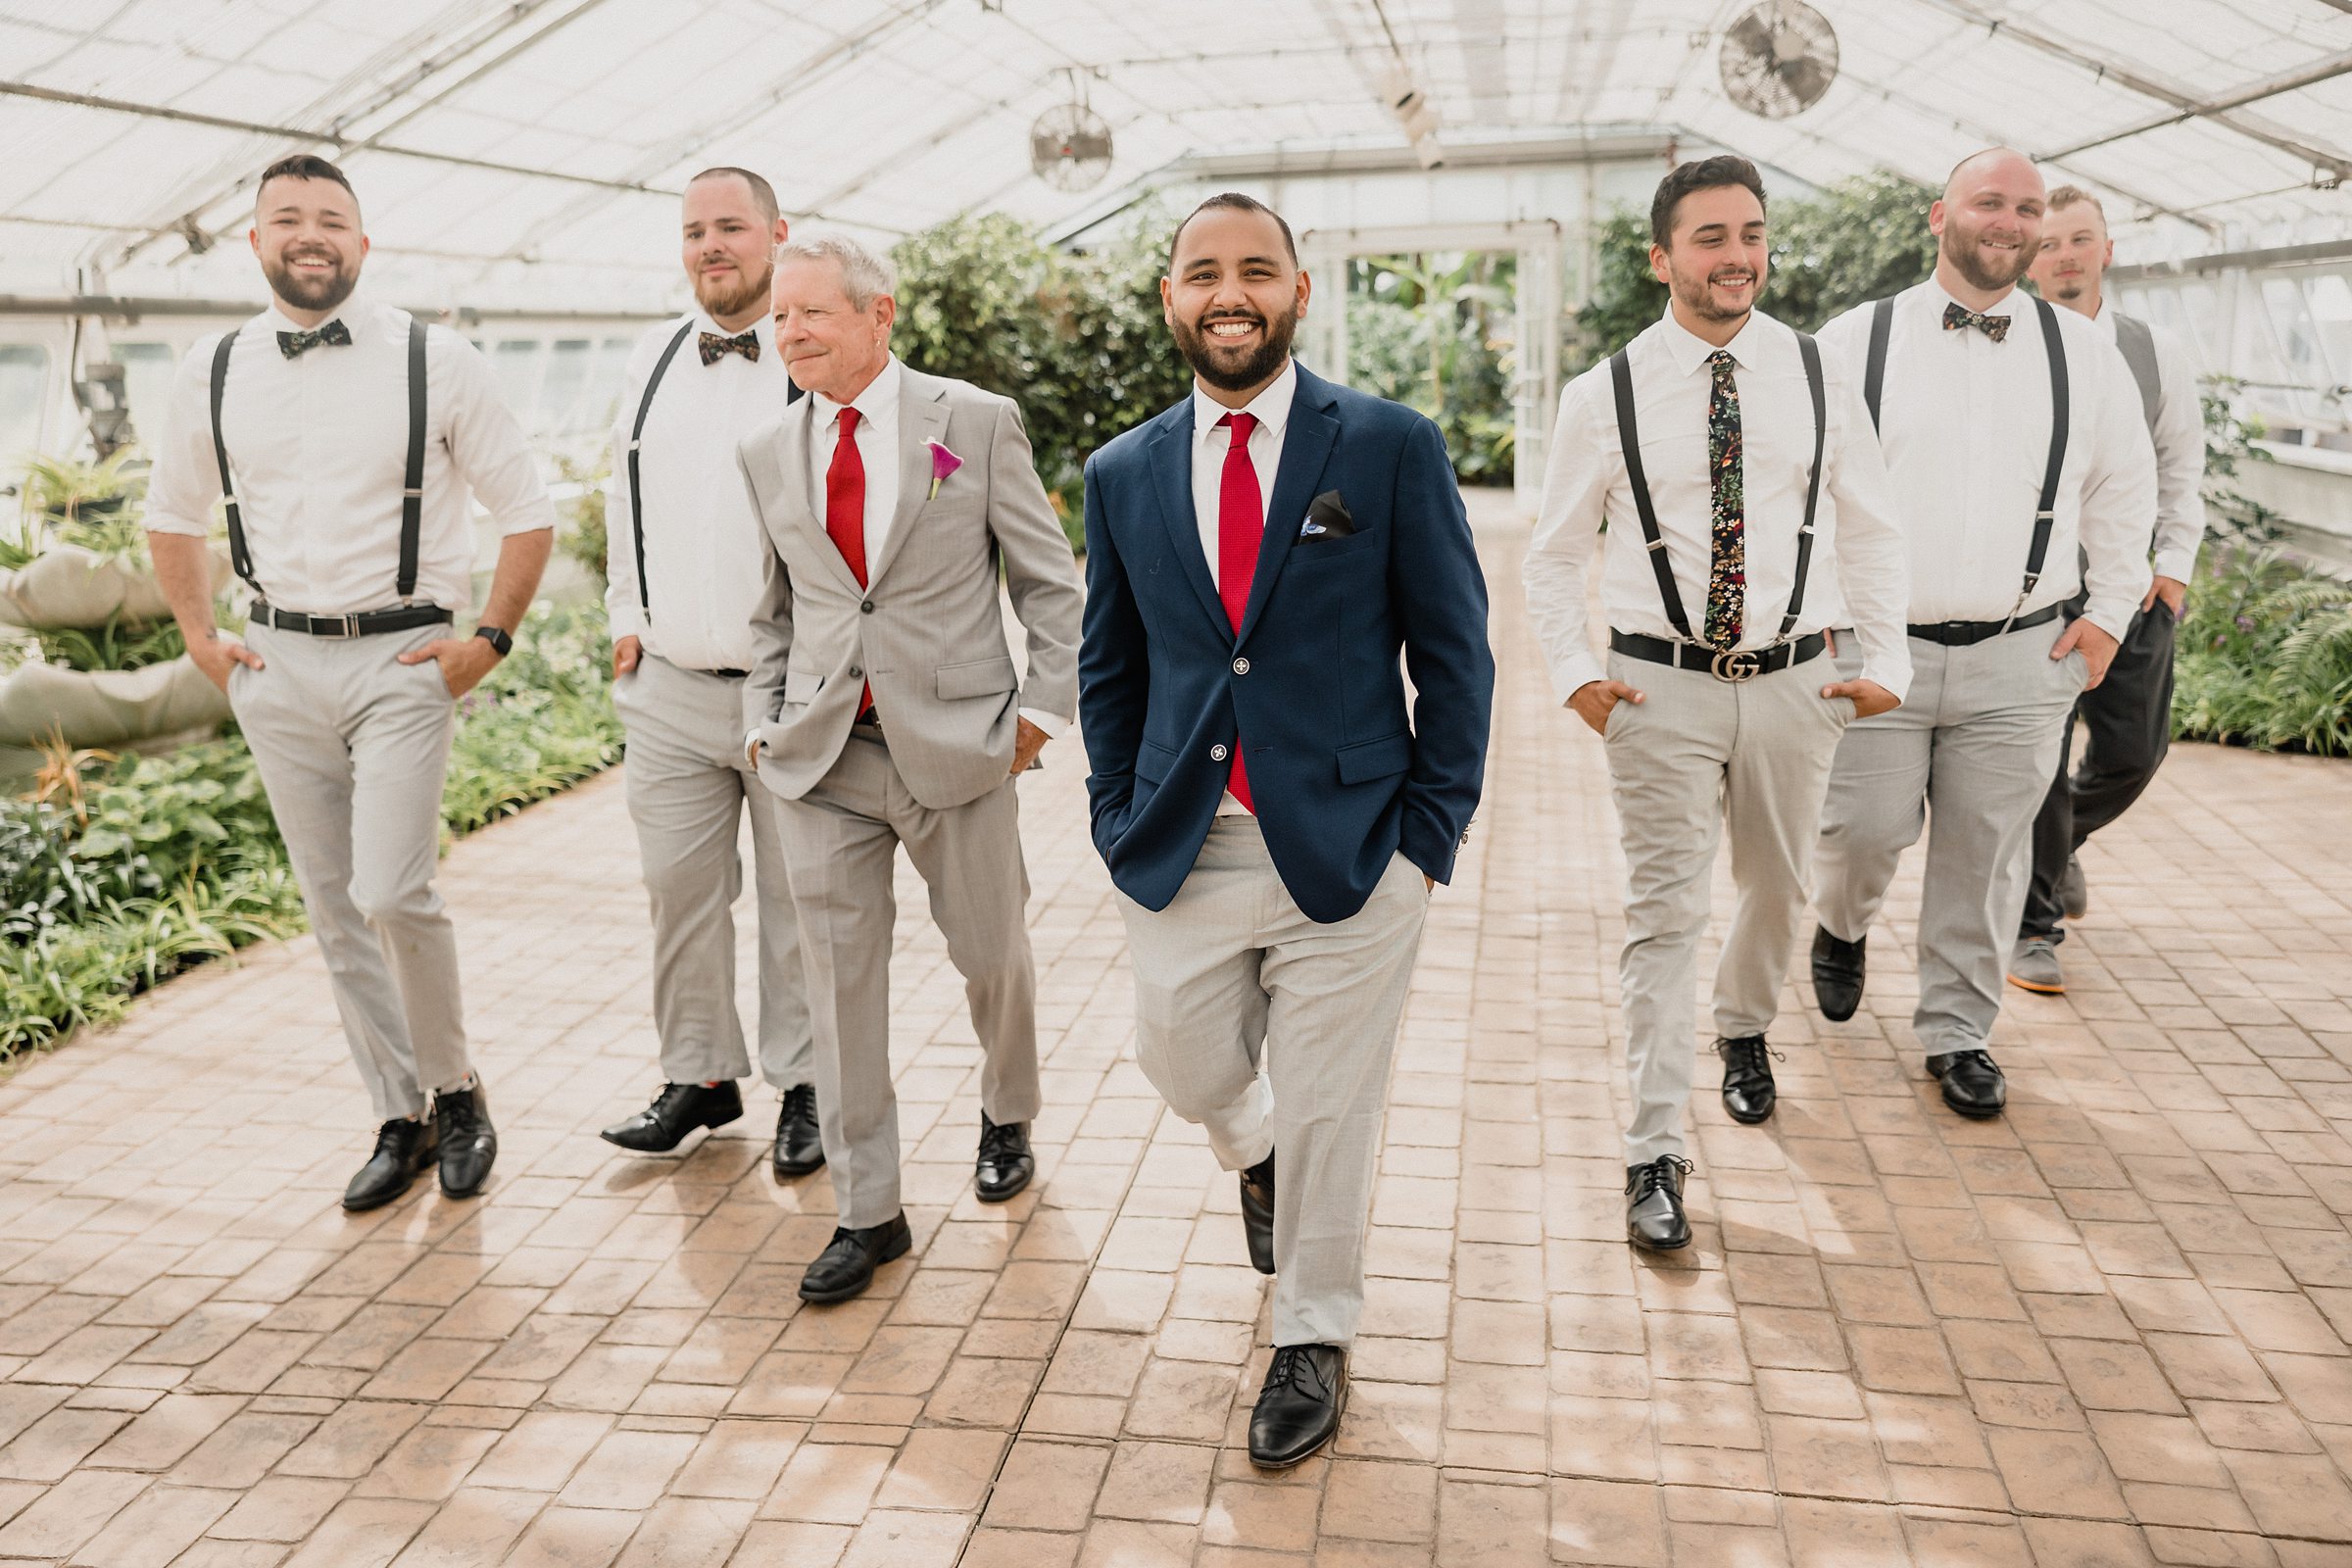 Groom and Groomsmen during his wedding at the Bird Haven Greenhouse & Conservatory in Joliet, Illinois.